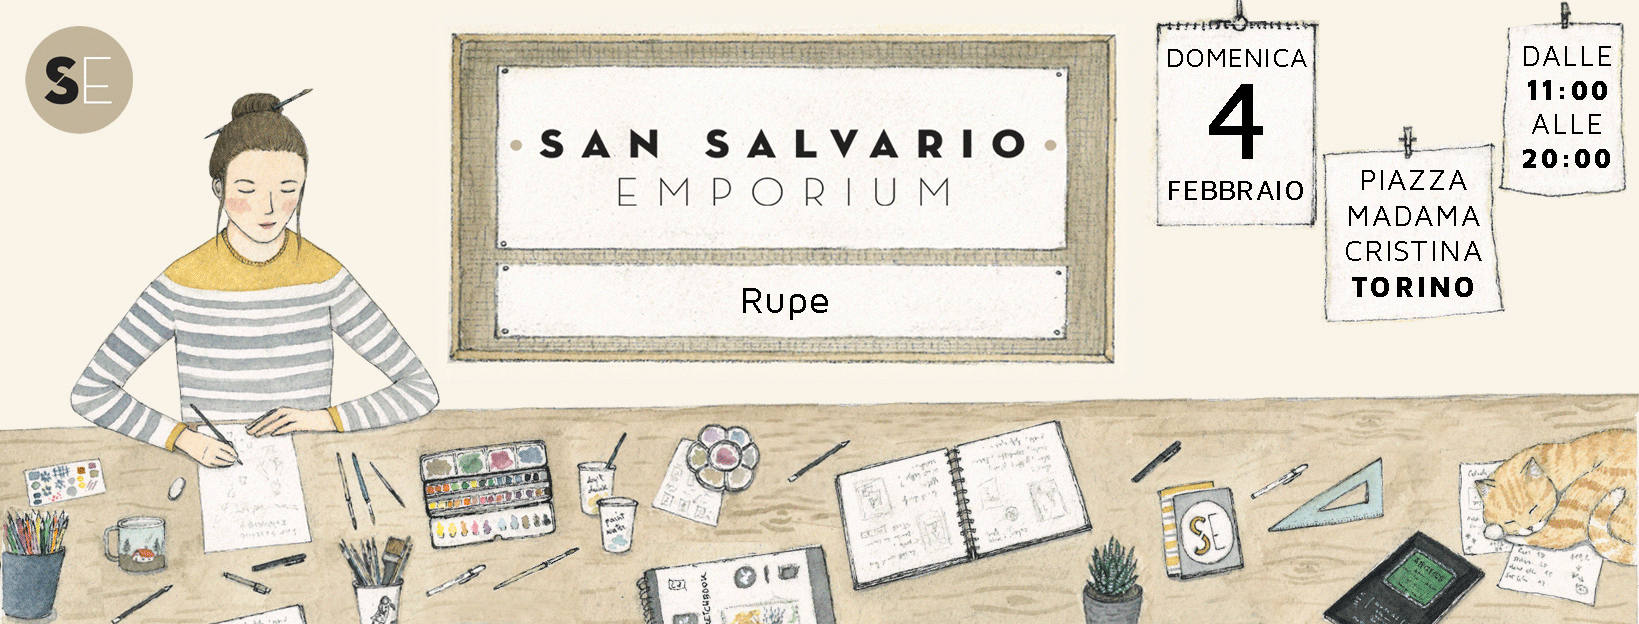 Rupe Clothing at the San Salvario Emporium on February 4th: An encounter between Tradition and Innovation